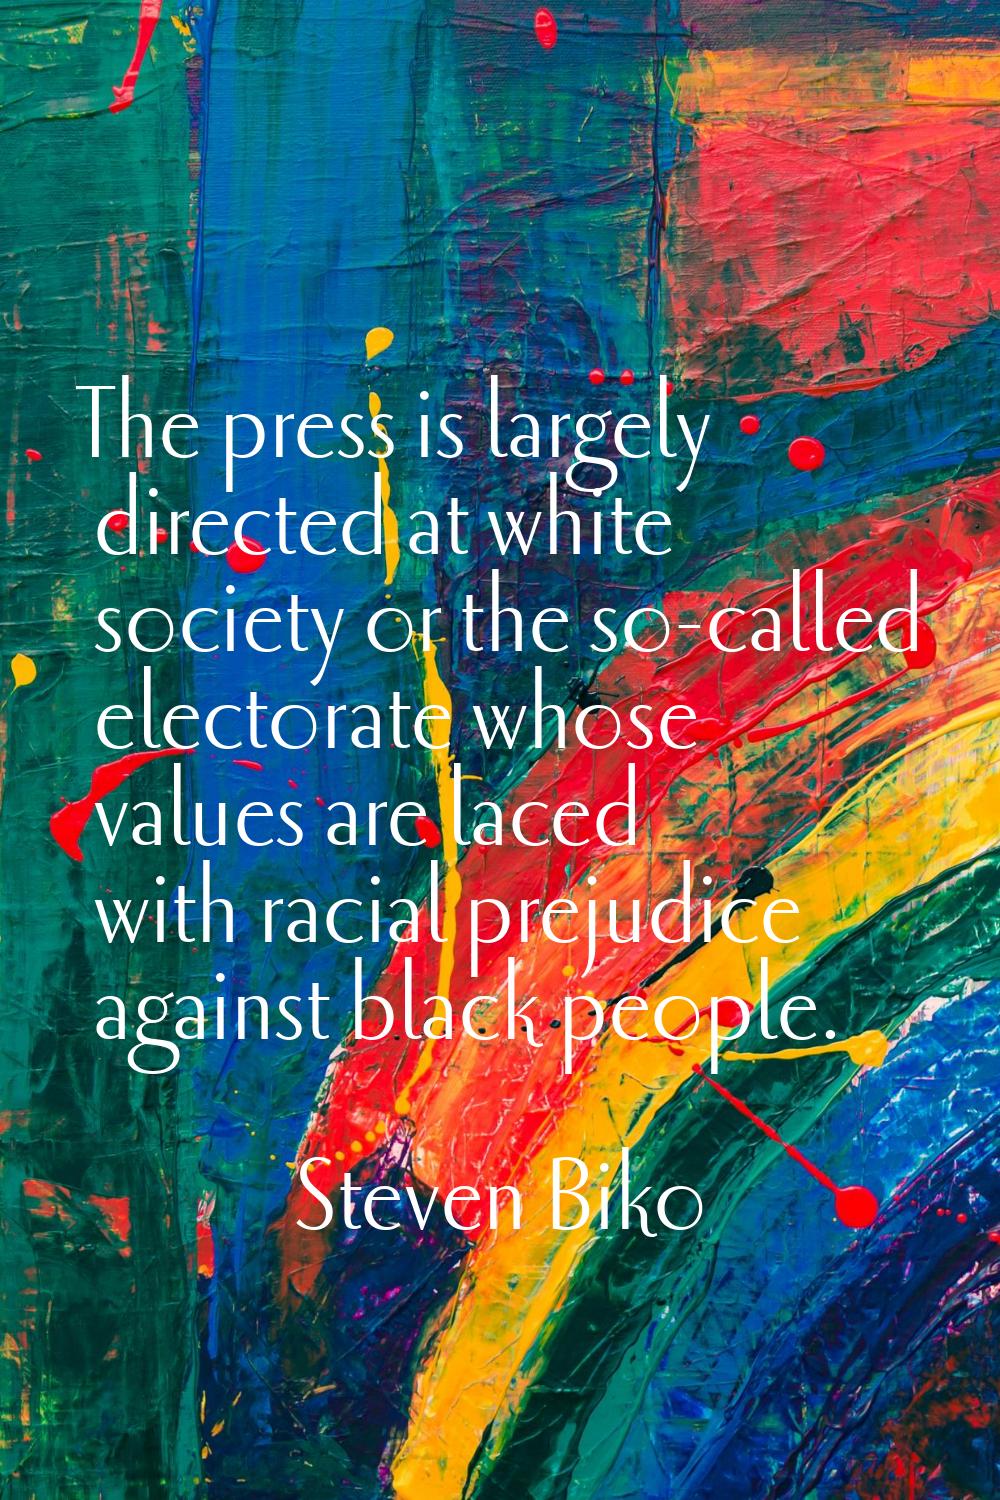 The press is largely directed at white society or the so-called electorate whose values are laced w